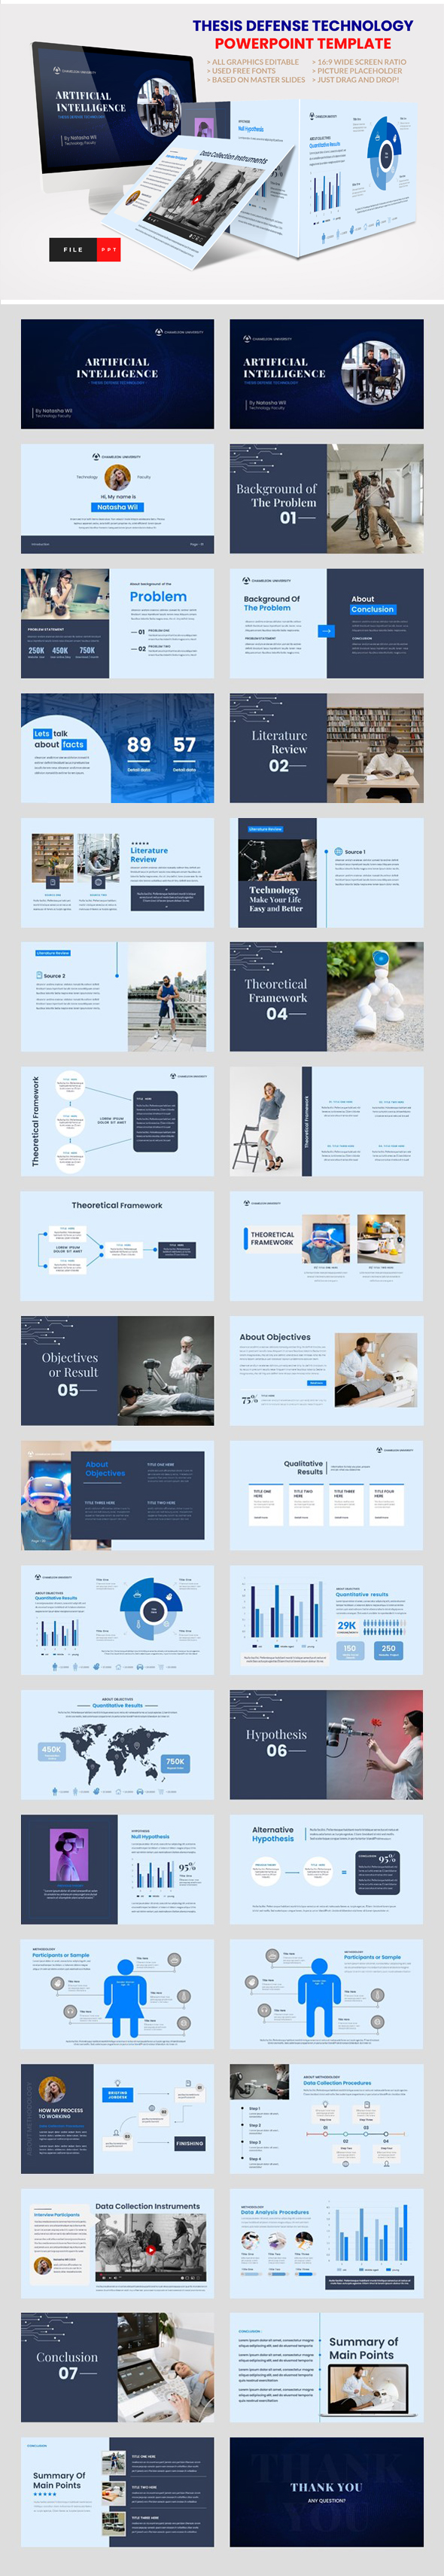 [DOWNLOAD]Thesis Defense Technology Power Point Template